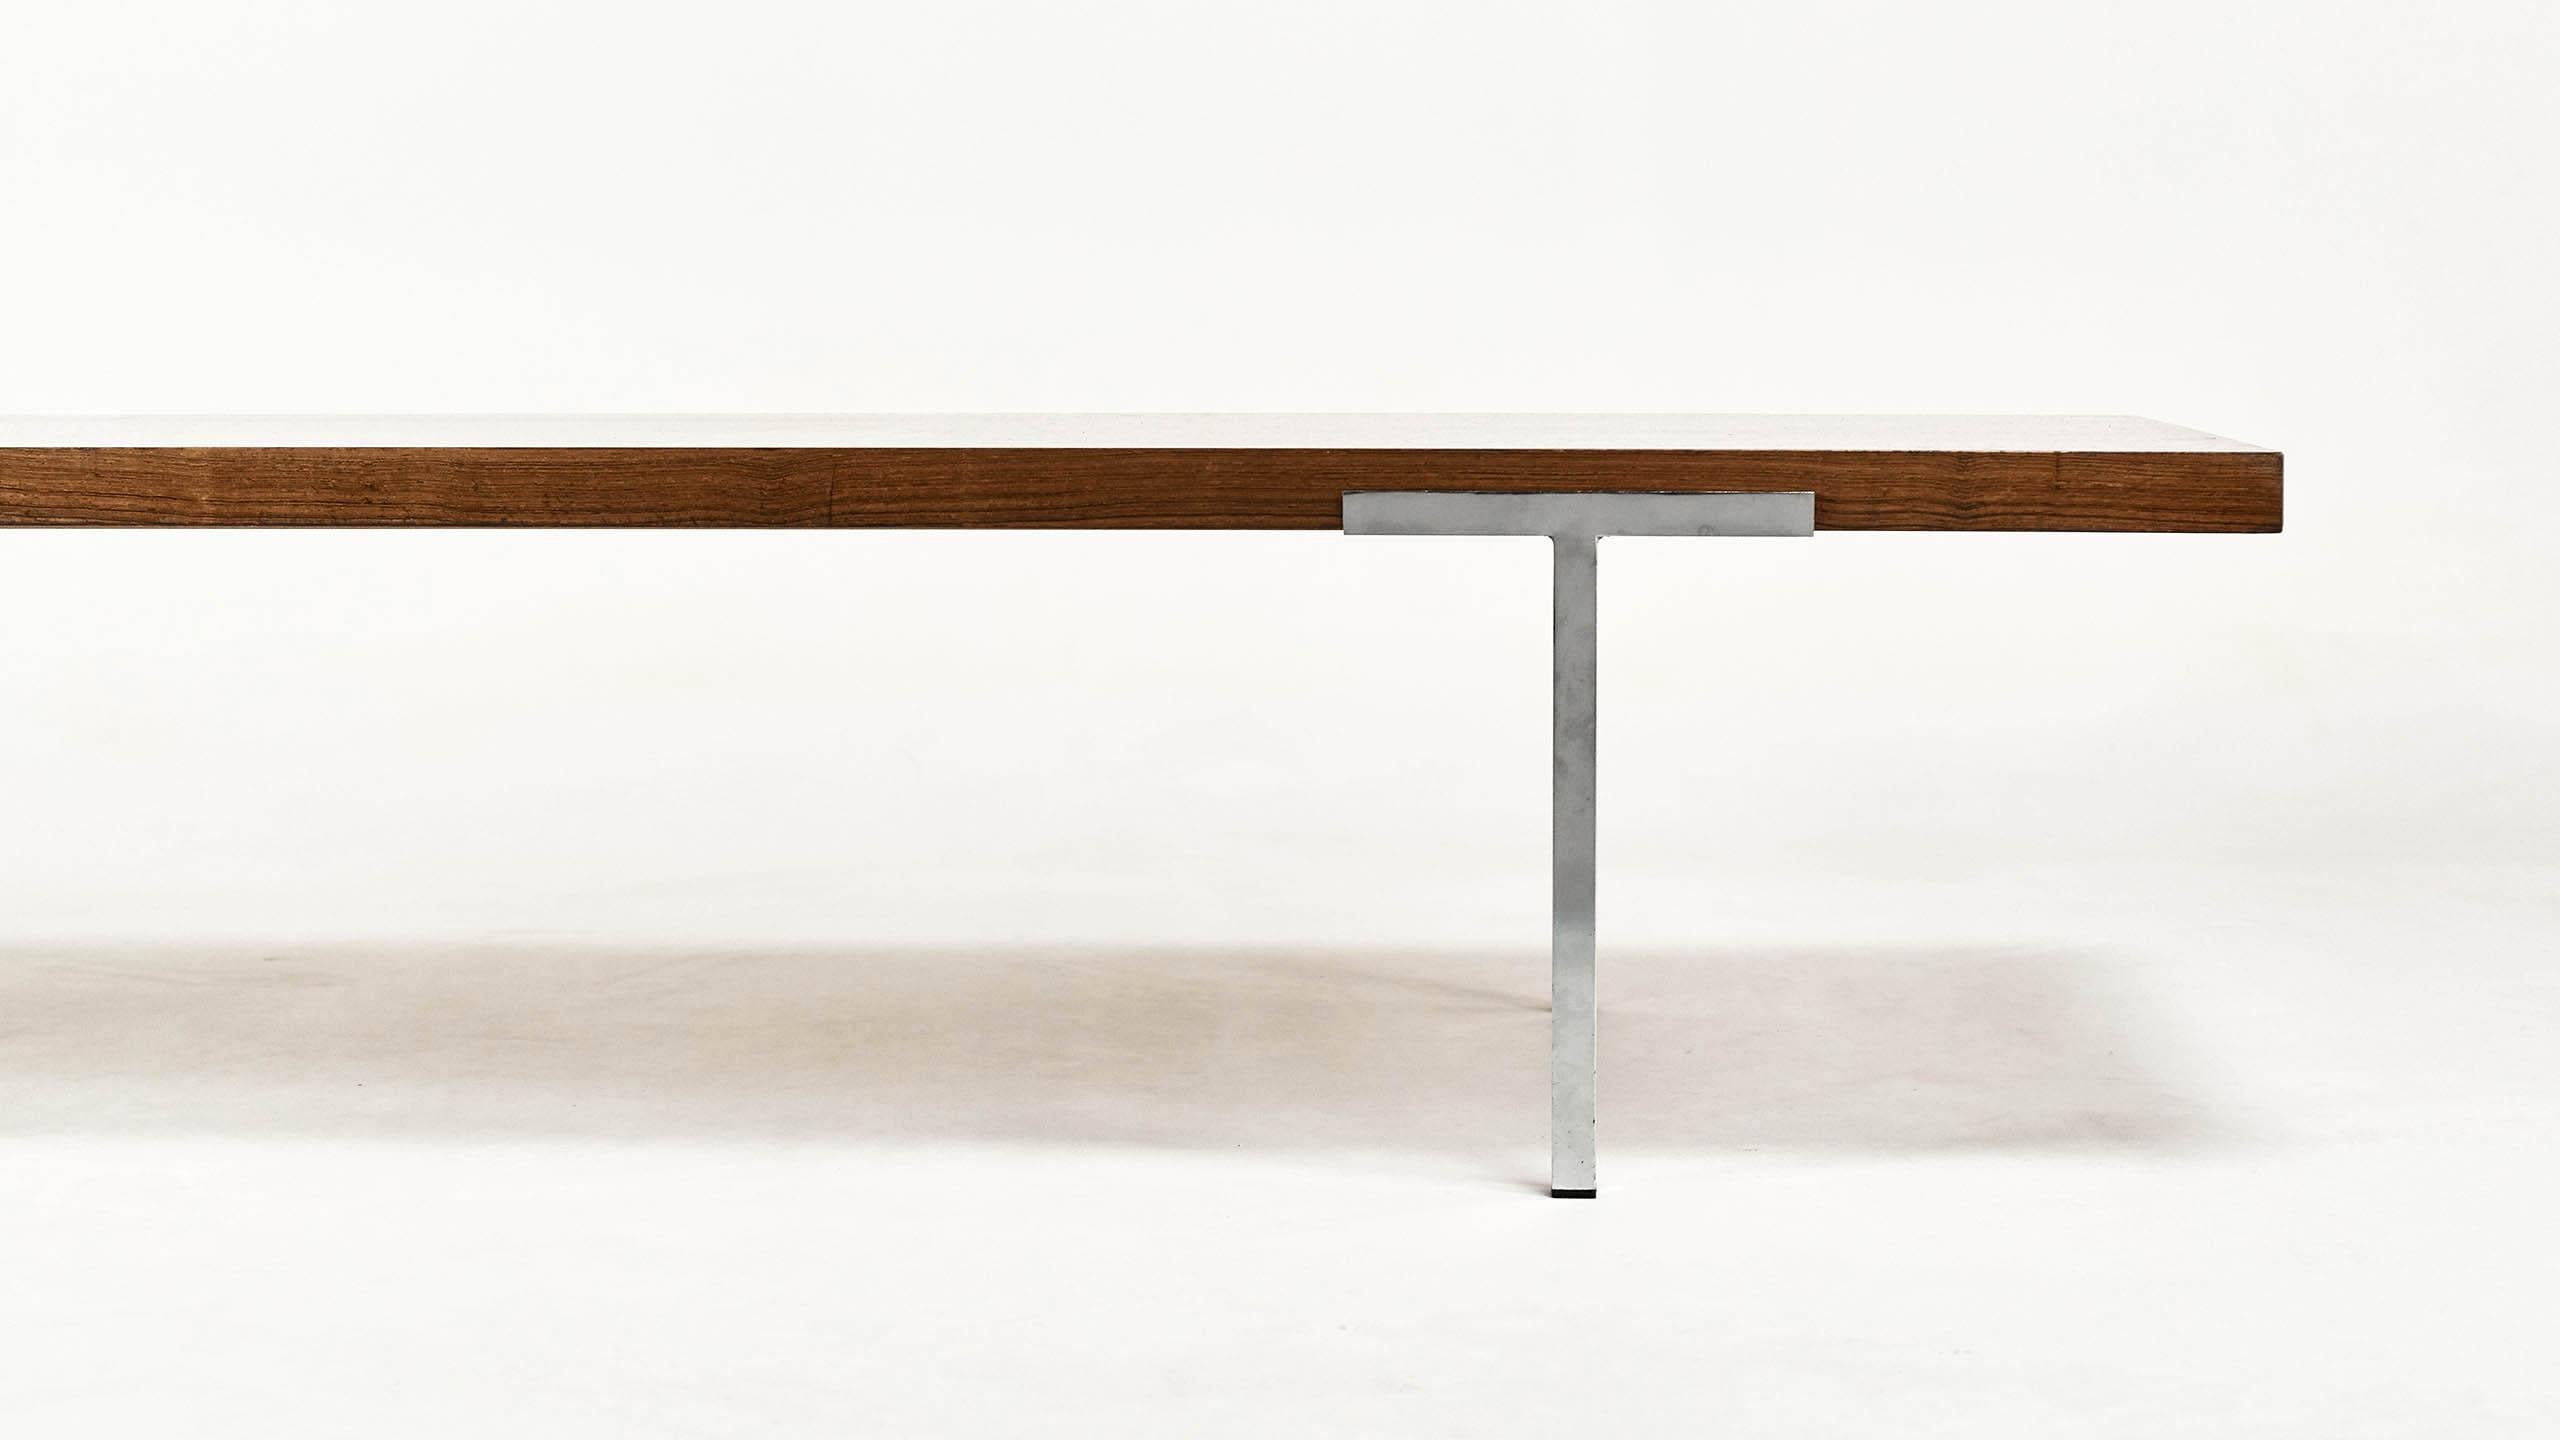 Rosewood Jacqueline Lecoq & Antoine Philippon, Important Coffee Table for Laauser 